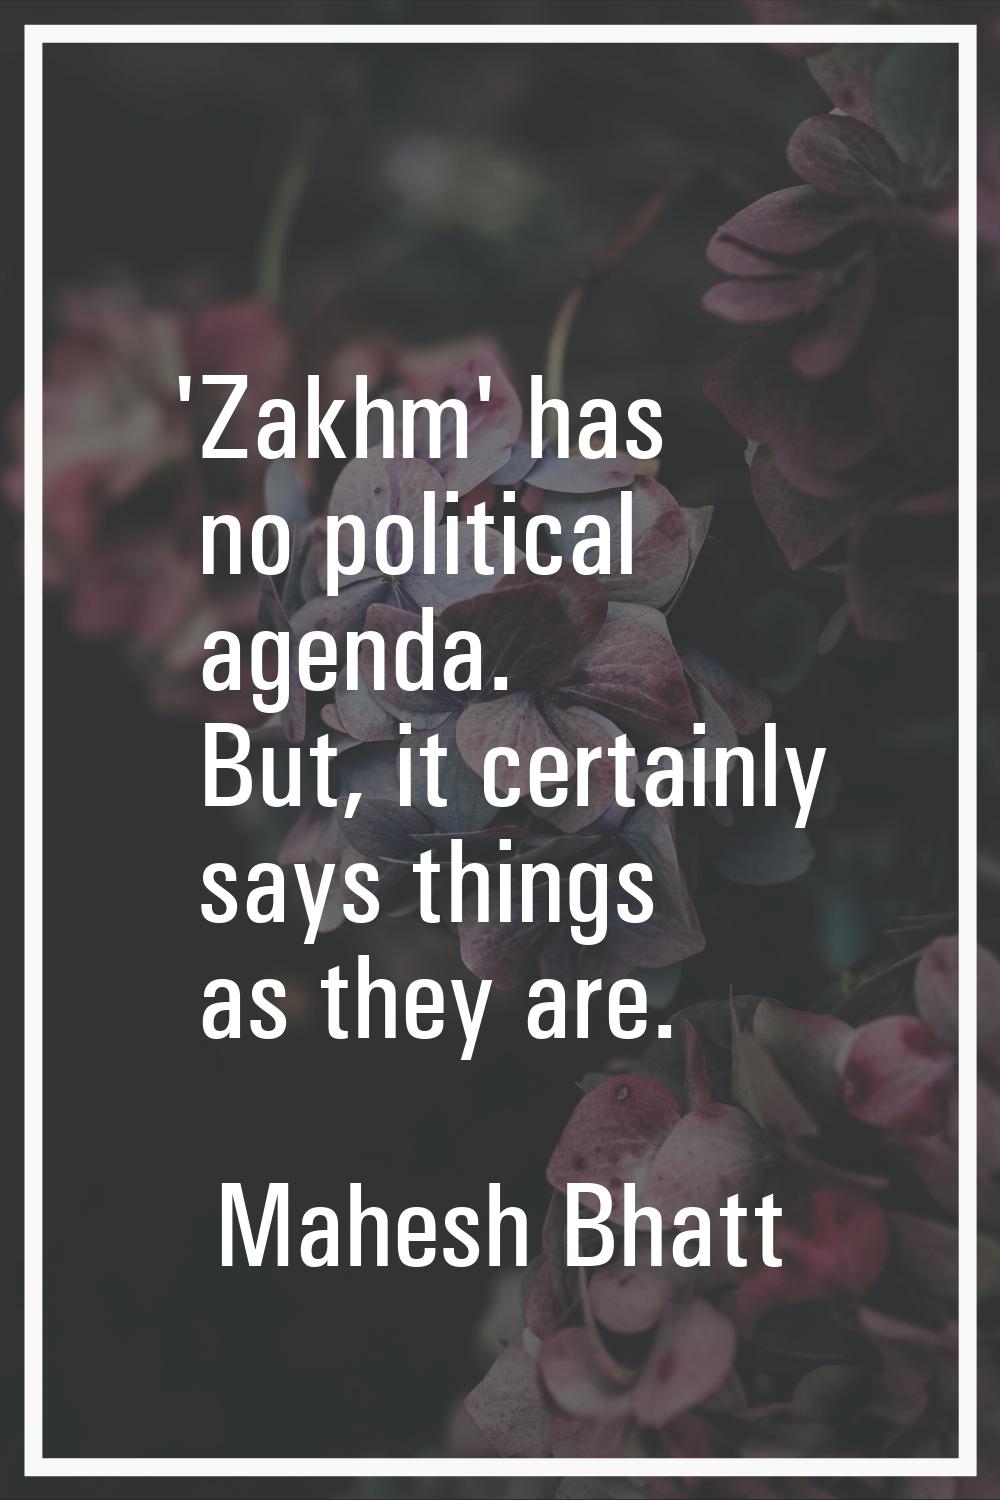 'Zakhm' has no political agenda. But, it certainly says things as they are.